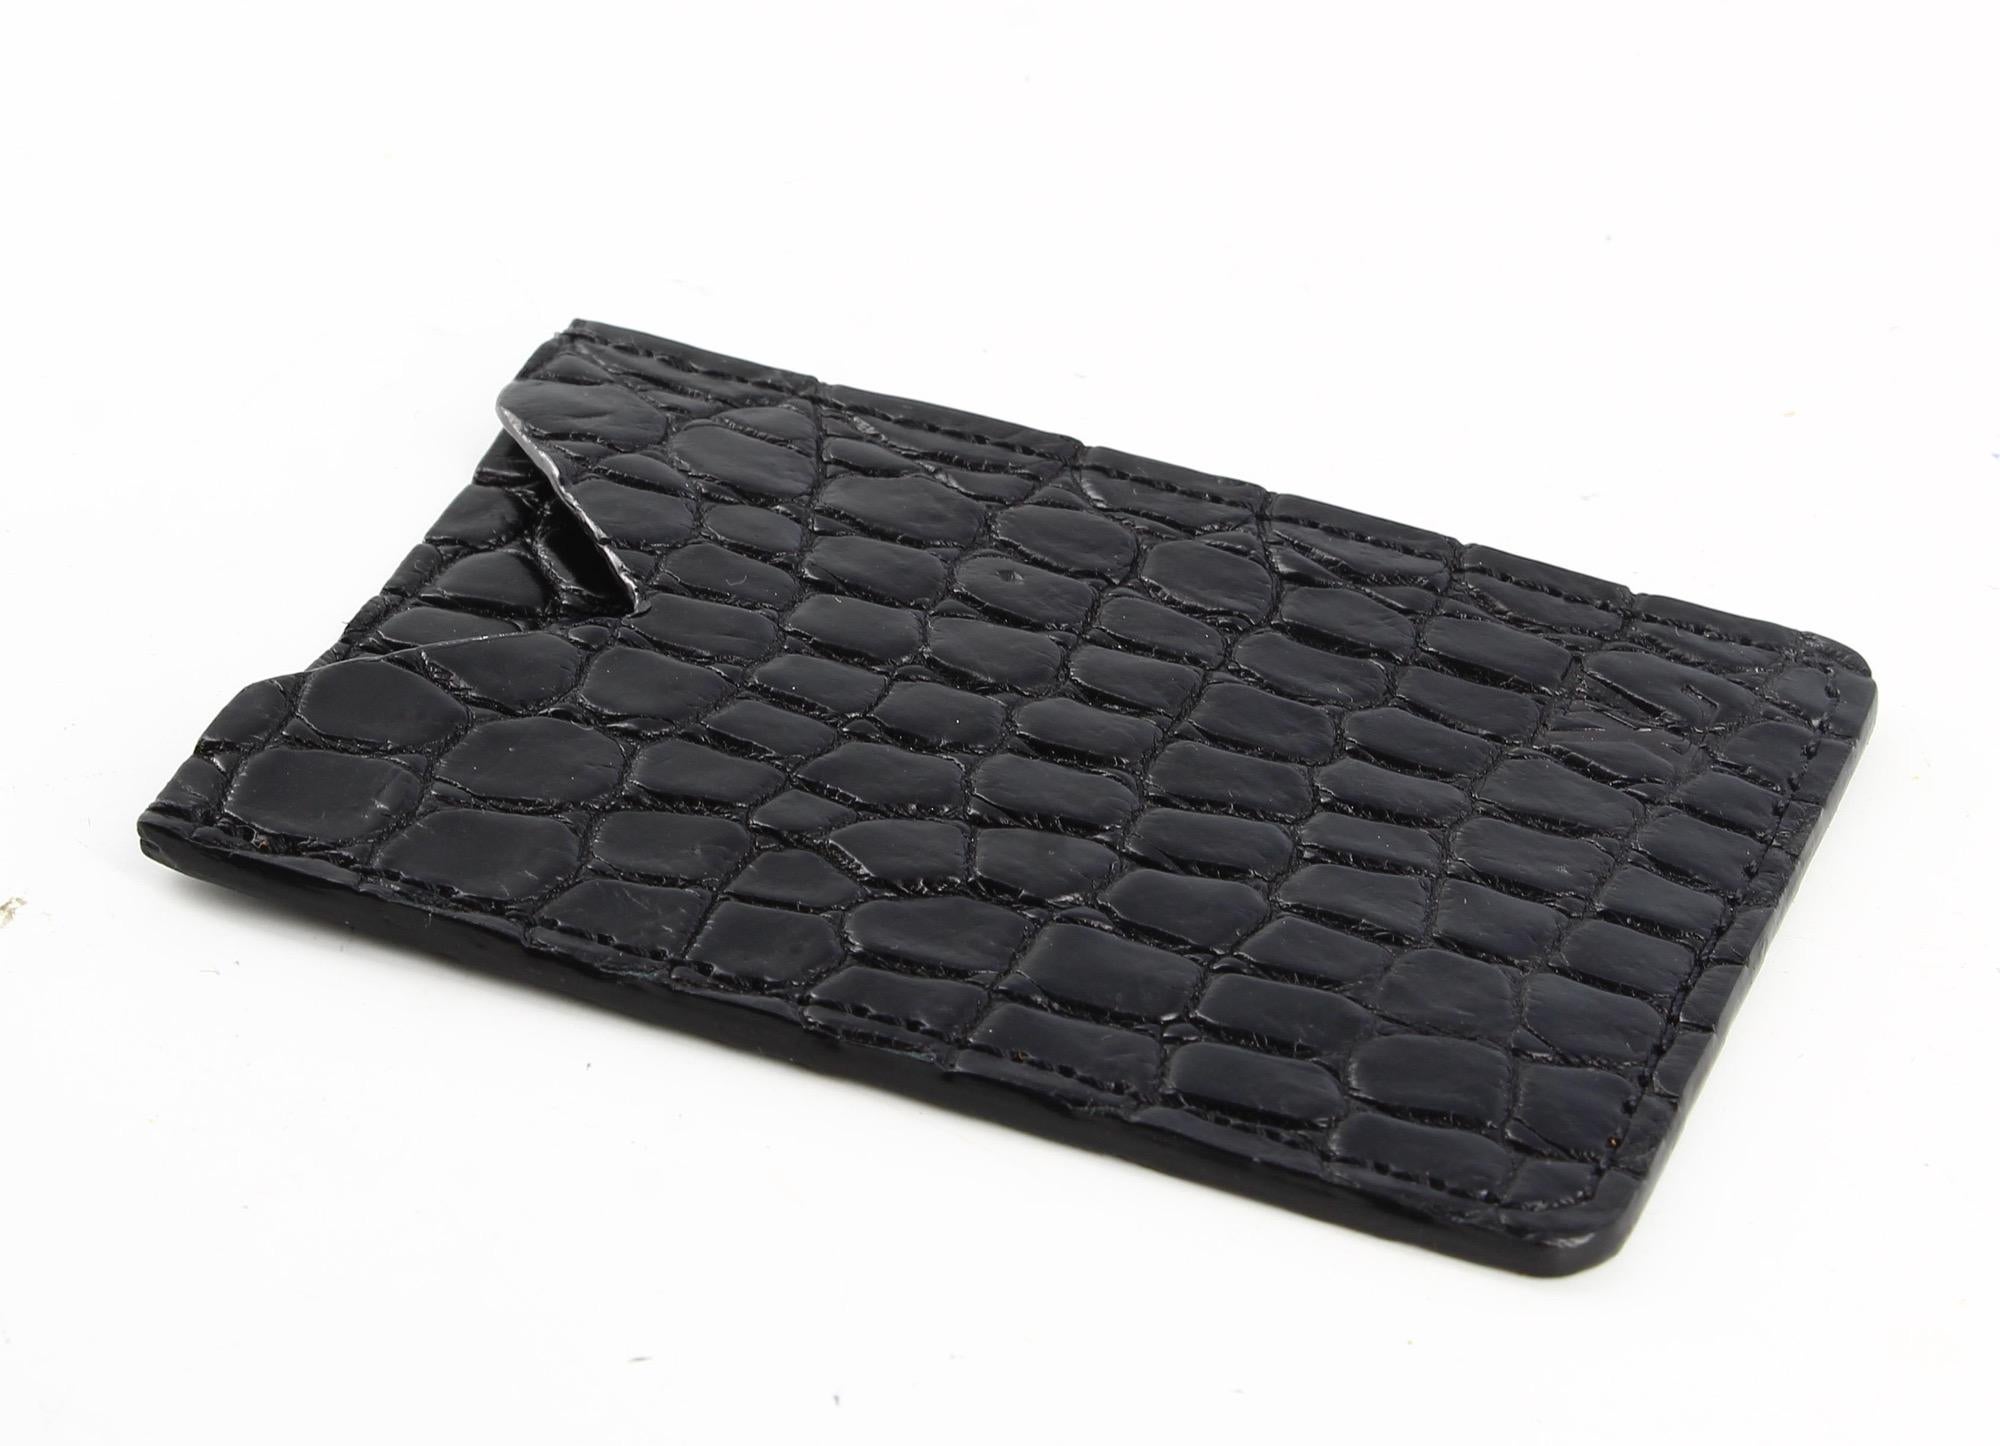 Louis Vuitton Black Croco Leather Card Case

- Good condition, shows slight traces of wear over time.
- Louis Vuitton black card case
- LV logo on the bottom right of the front
- Interior: Black croco leather
- Packaging: Opulence luxury vintage